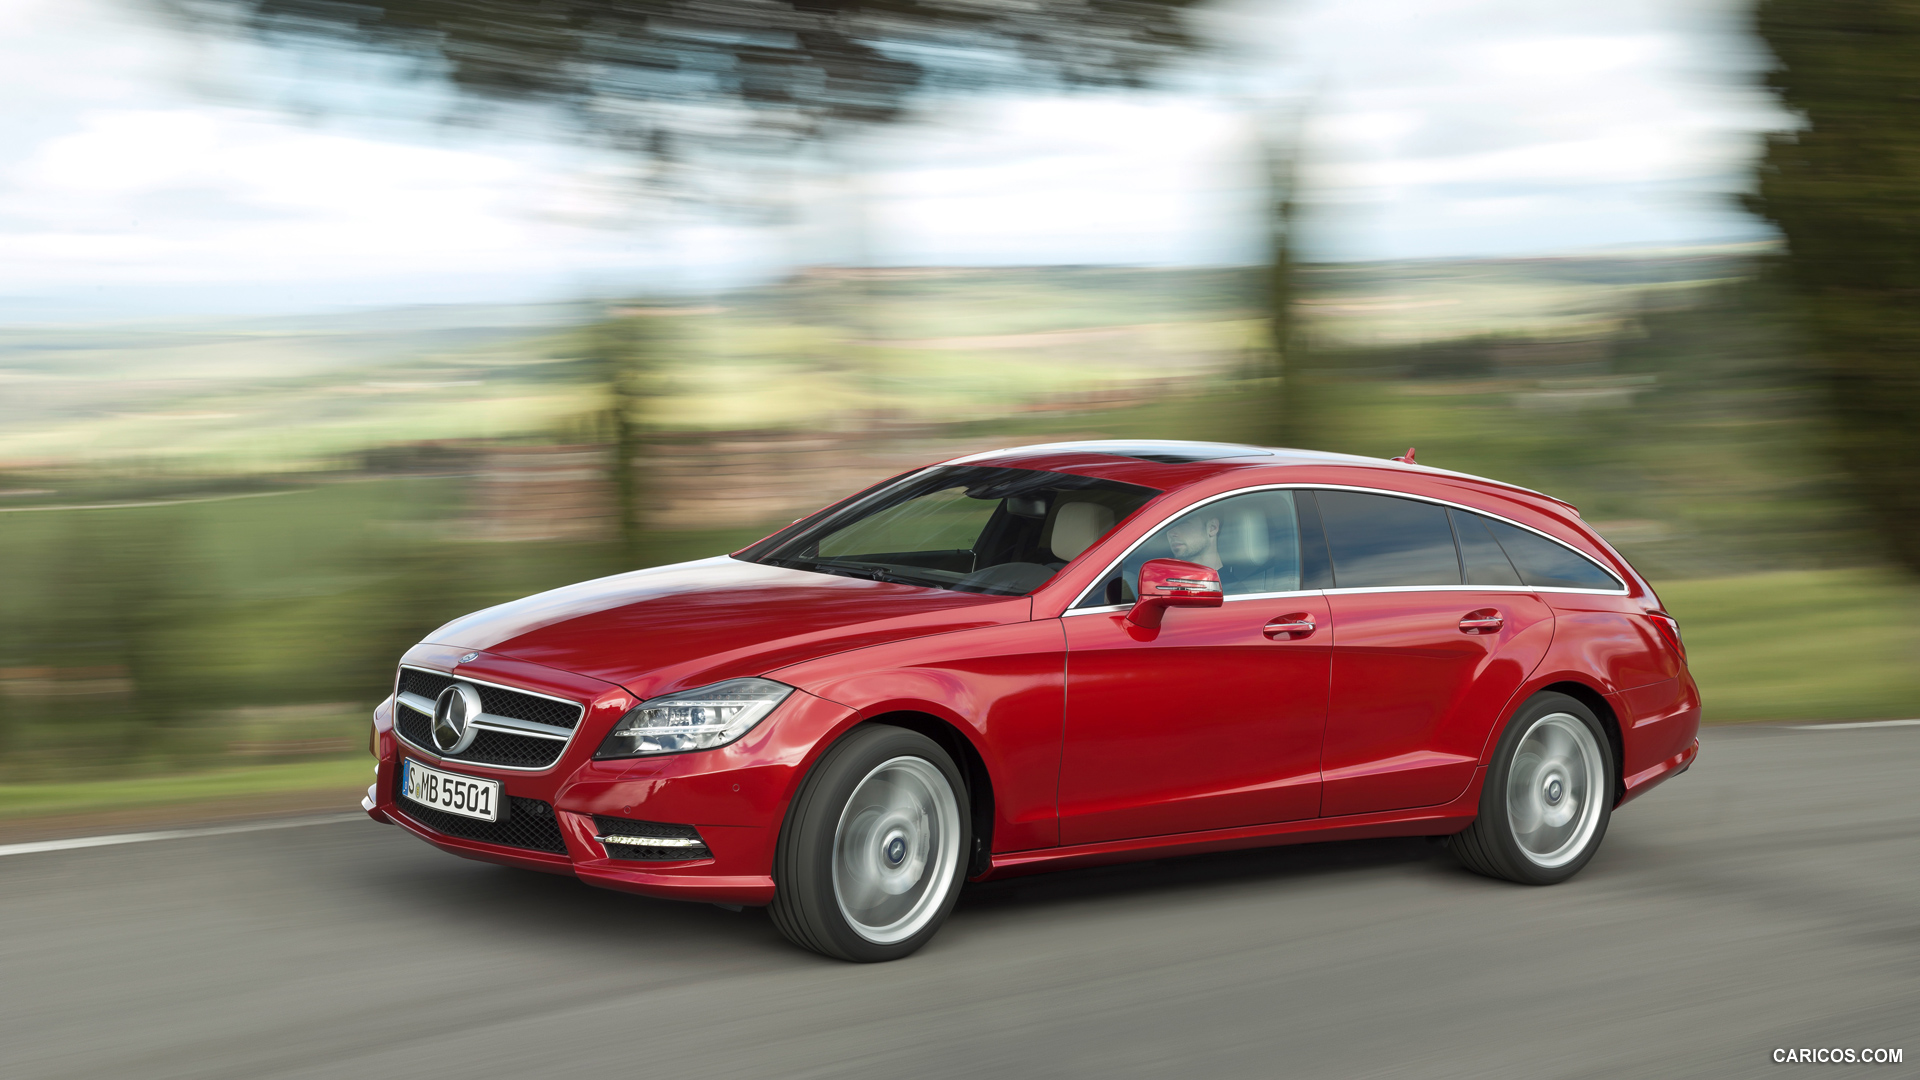 2013 Mercedes-Benz CLS 500 4MATIC Shooting Brake - Front, #9 of 184